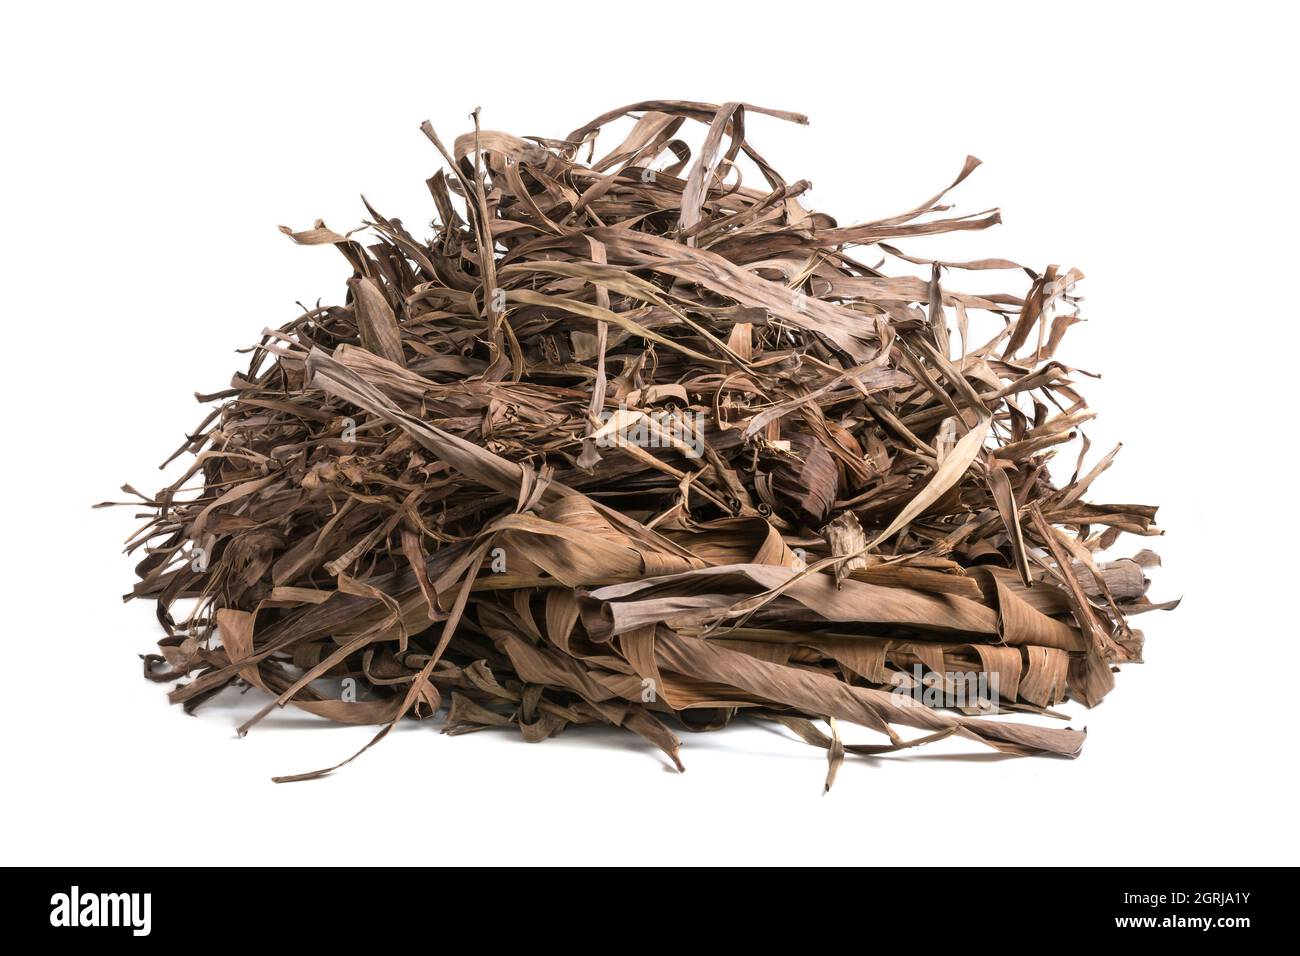 heap of dried banana tree leaves, dead, fallen and discolored leaves to make garden compost, closeup isolated in white background Stock Photo